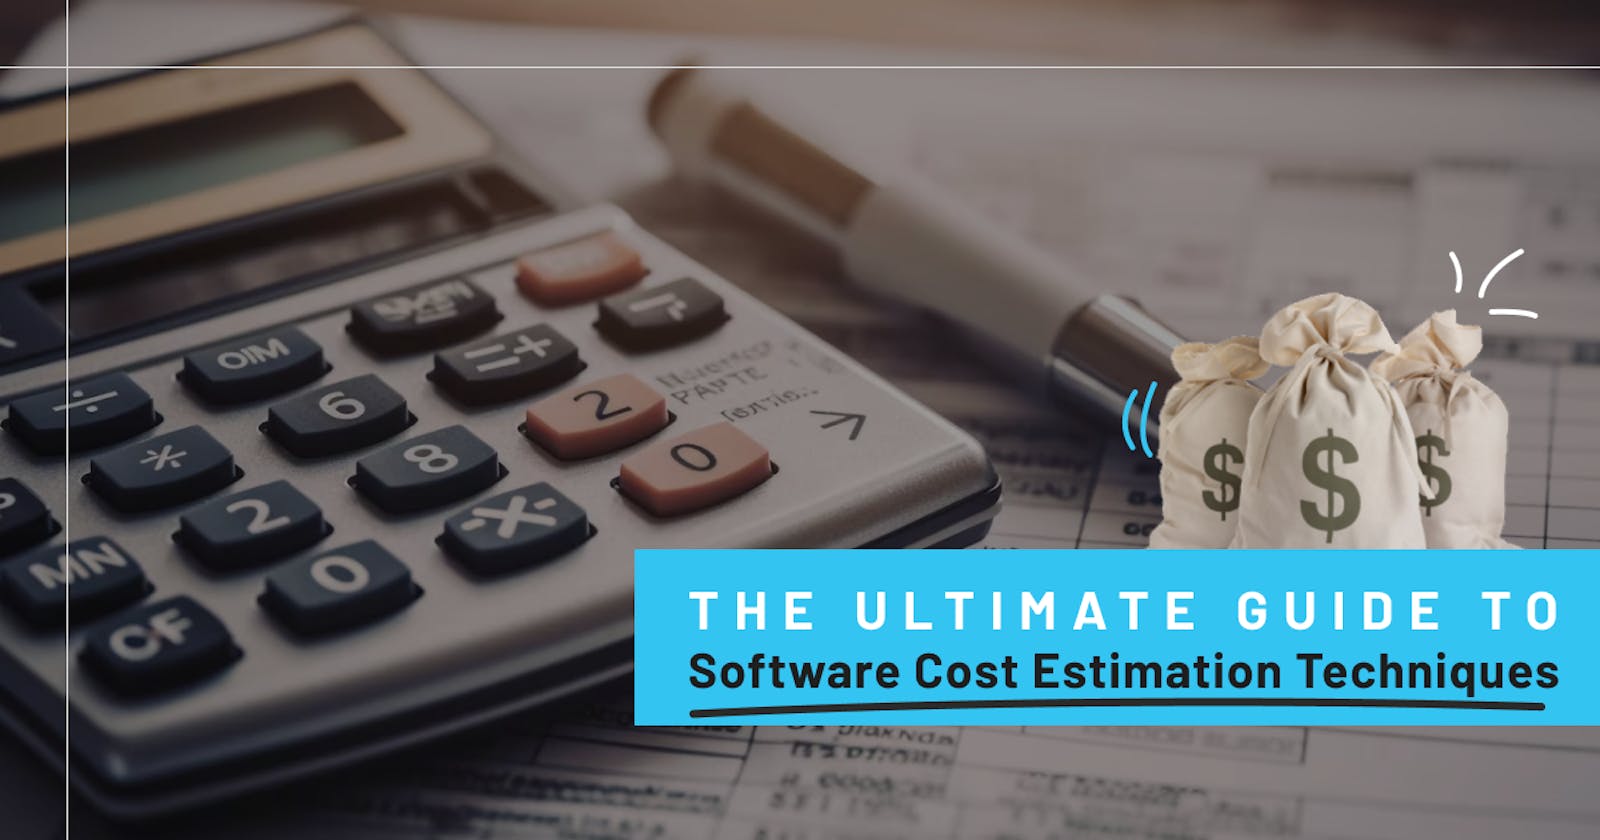 The Ultimate Guide to Software Cost Estimation Techniques